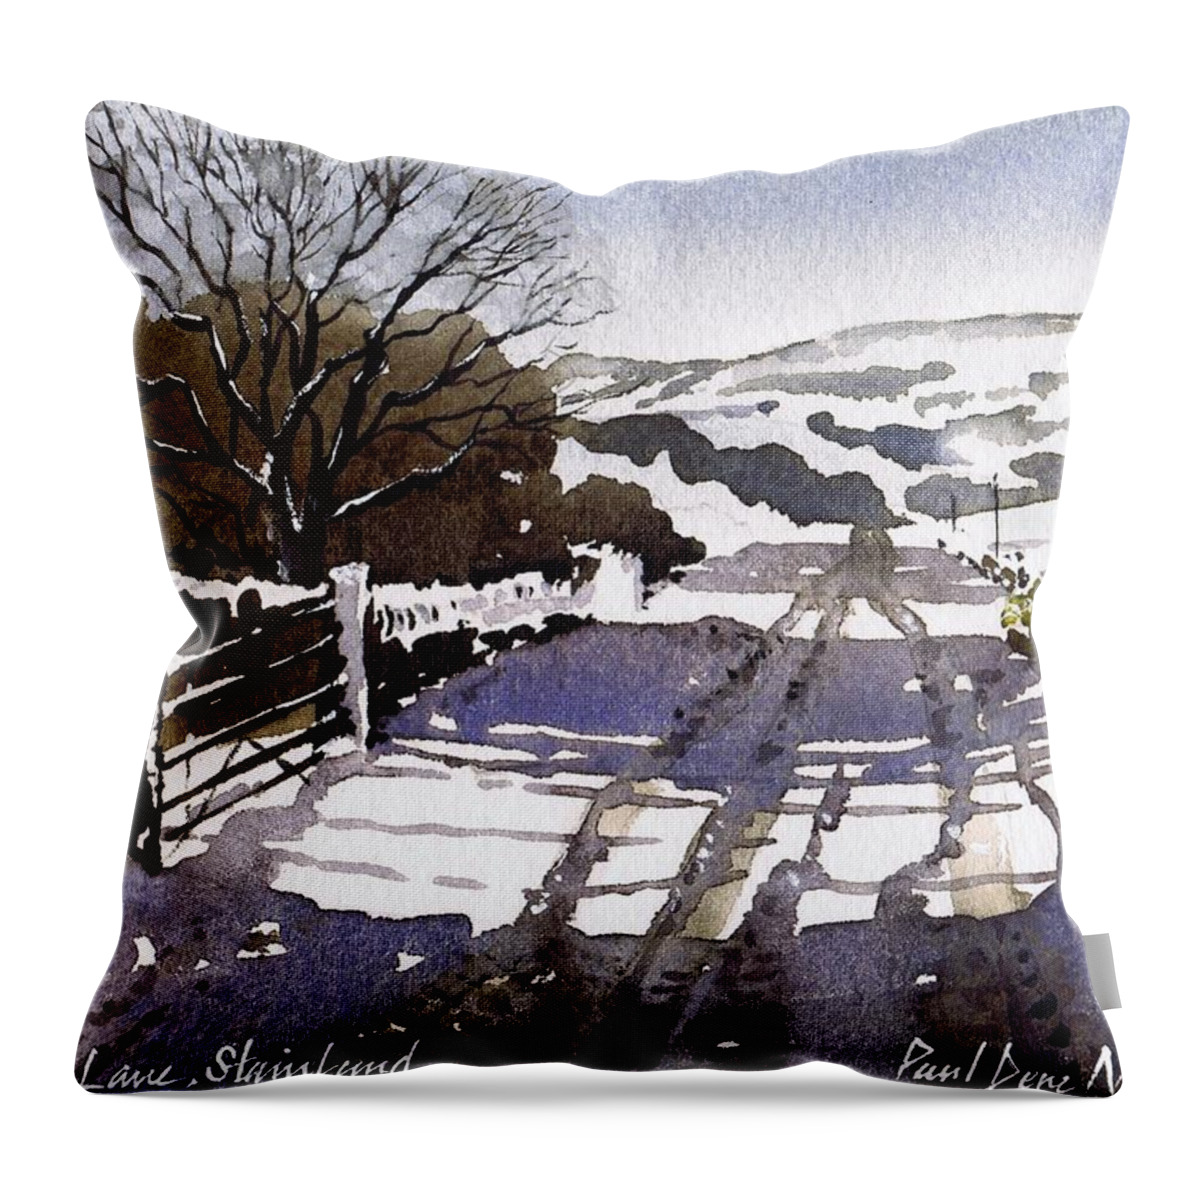 Winter Throw Pillow featuring the painting Winters Lane Stainland by Paul Dene Marlor